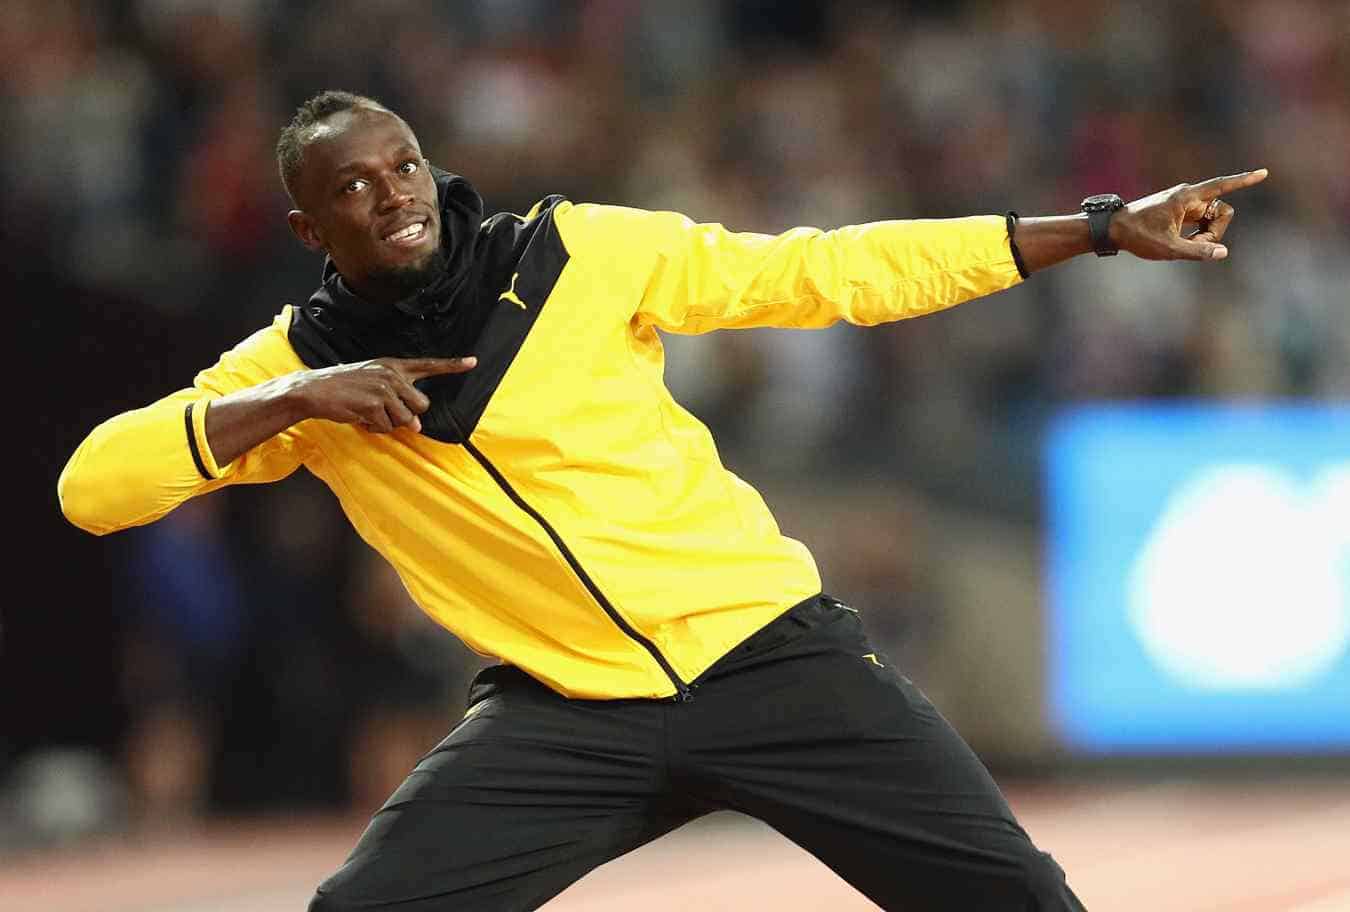 amaican ex-athlete Usain Bolt named his daughter Olympia.